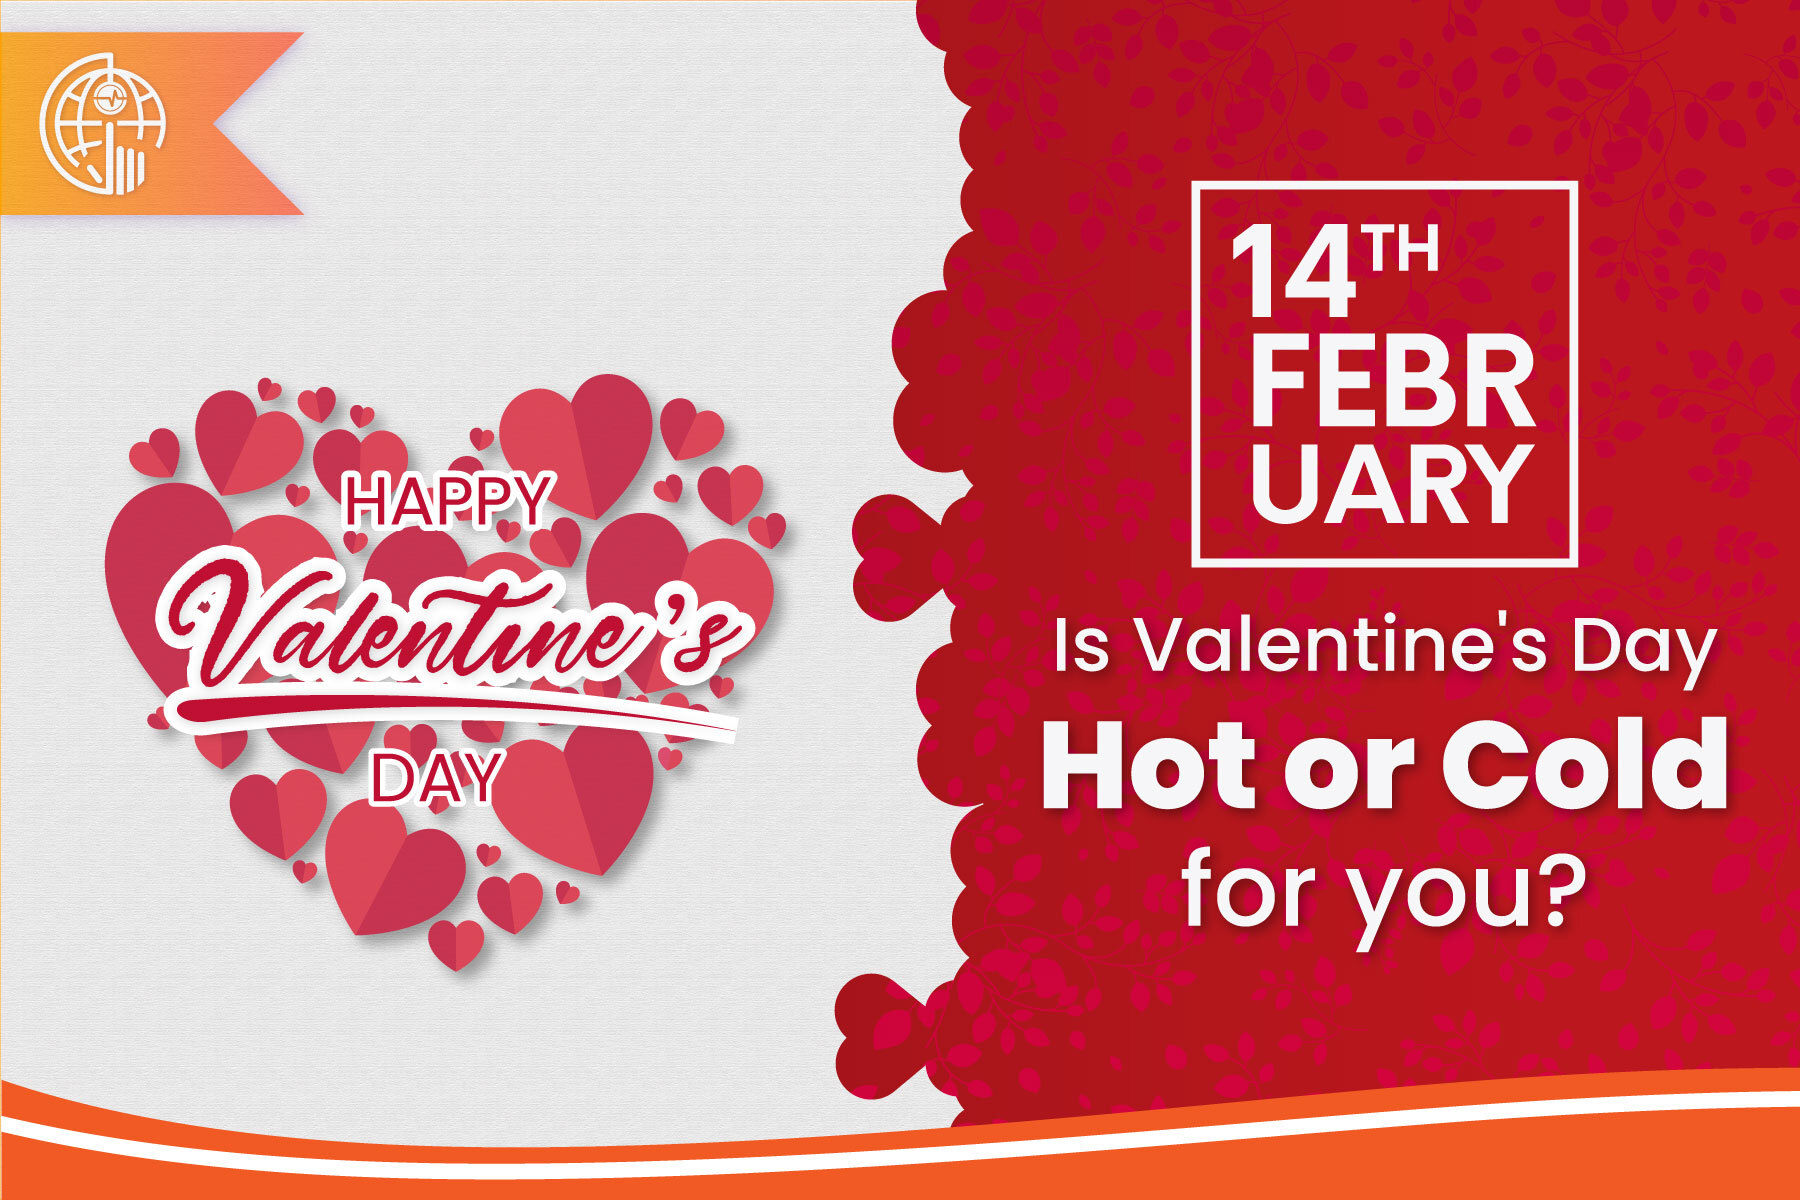 In this Valentine's season, what do you like best about your lover?